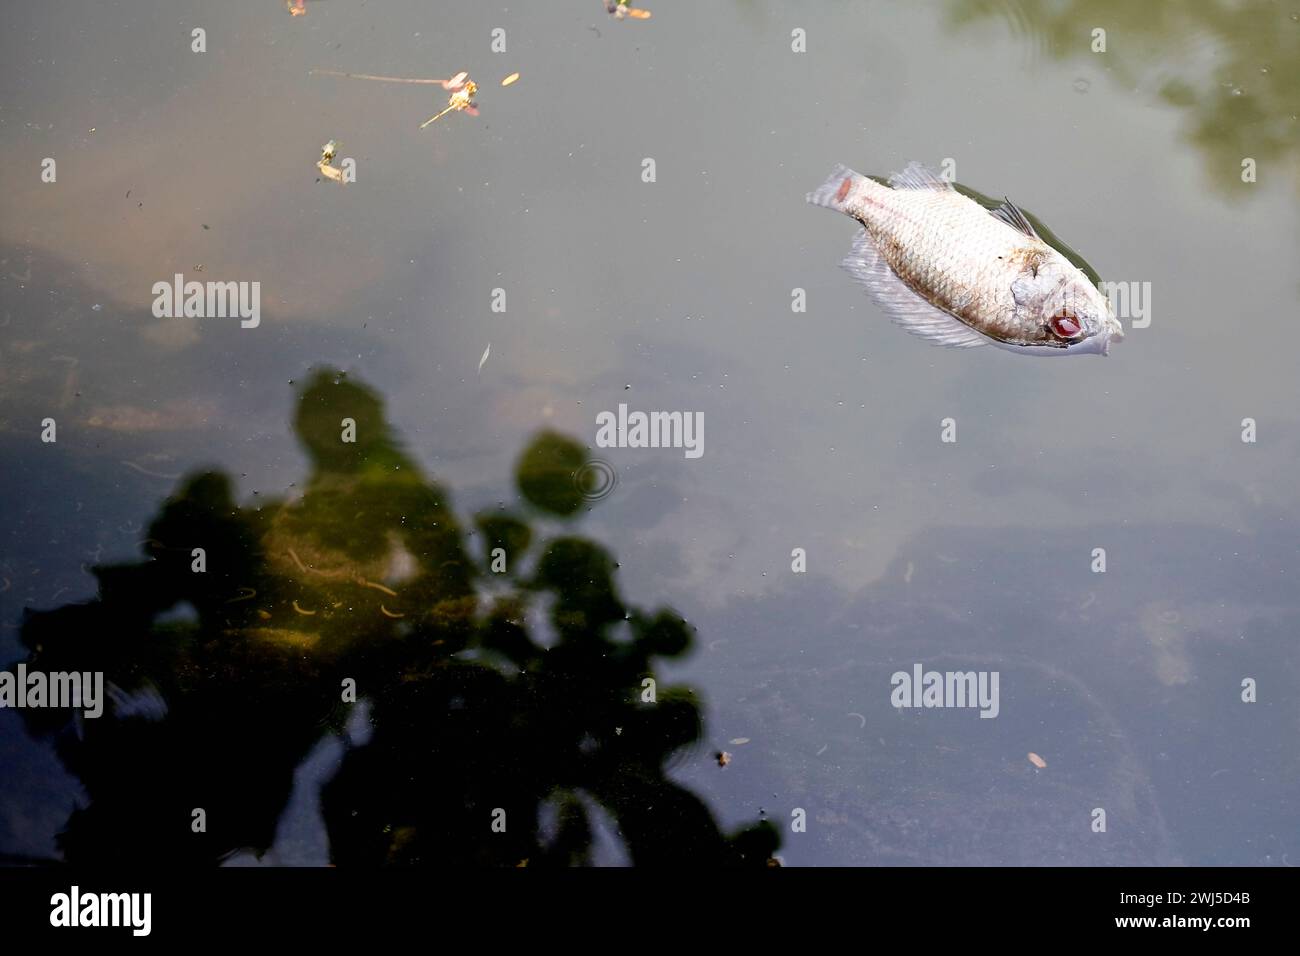 Dead tilapia fish floating on the lake Stock Photo